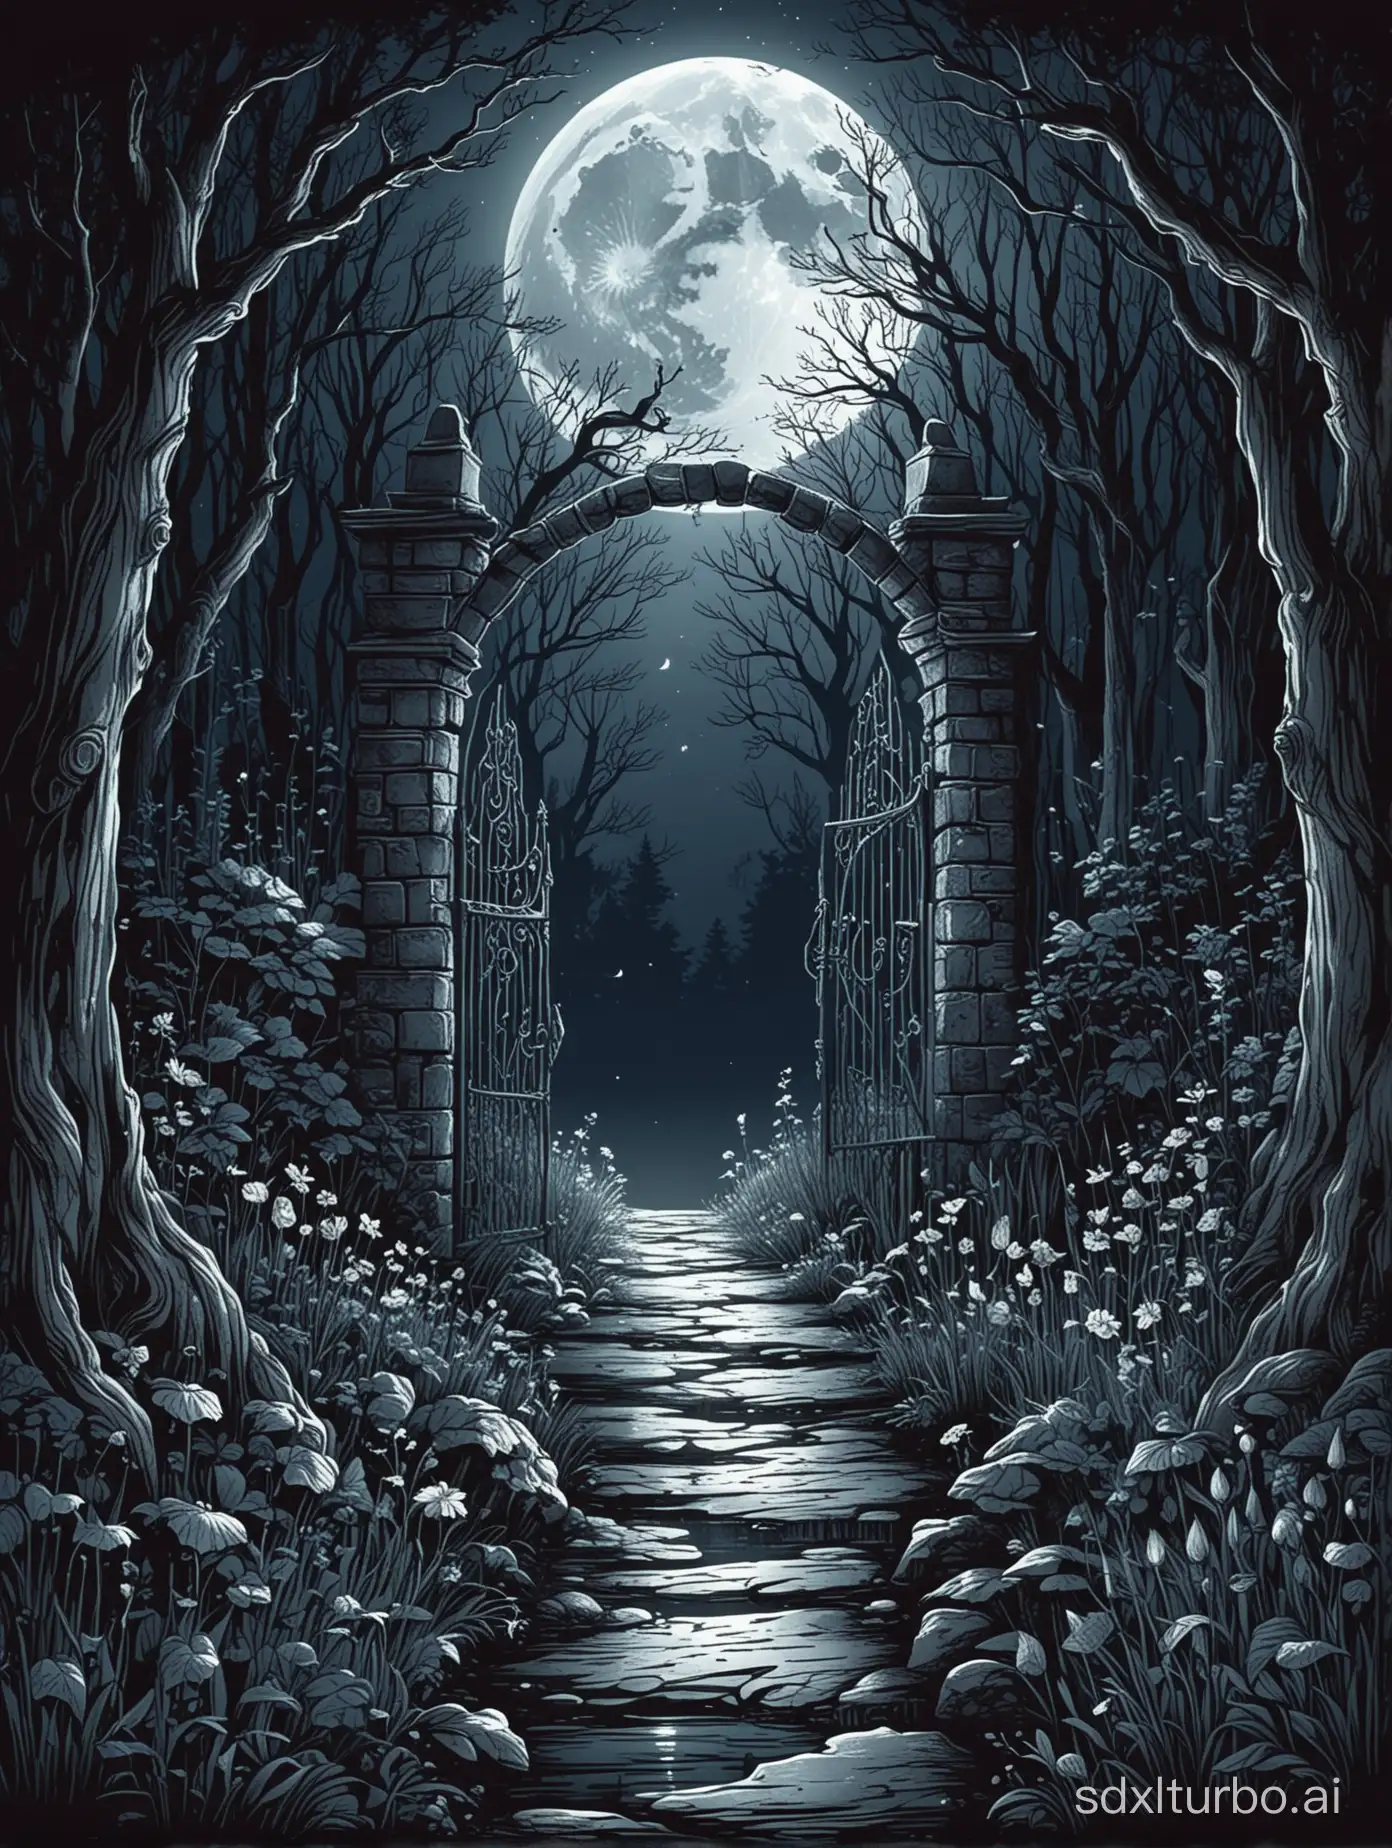 The entrance to the mysterious garden, moonlight reflecting, werewolf, fairy tale, hand-drawn, simple